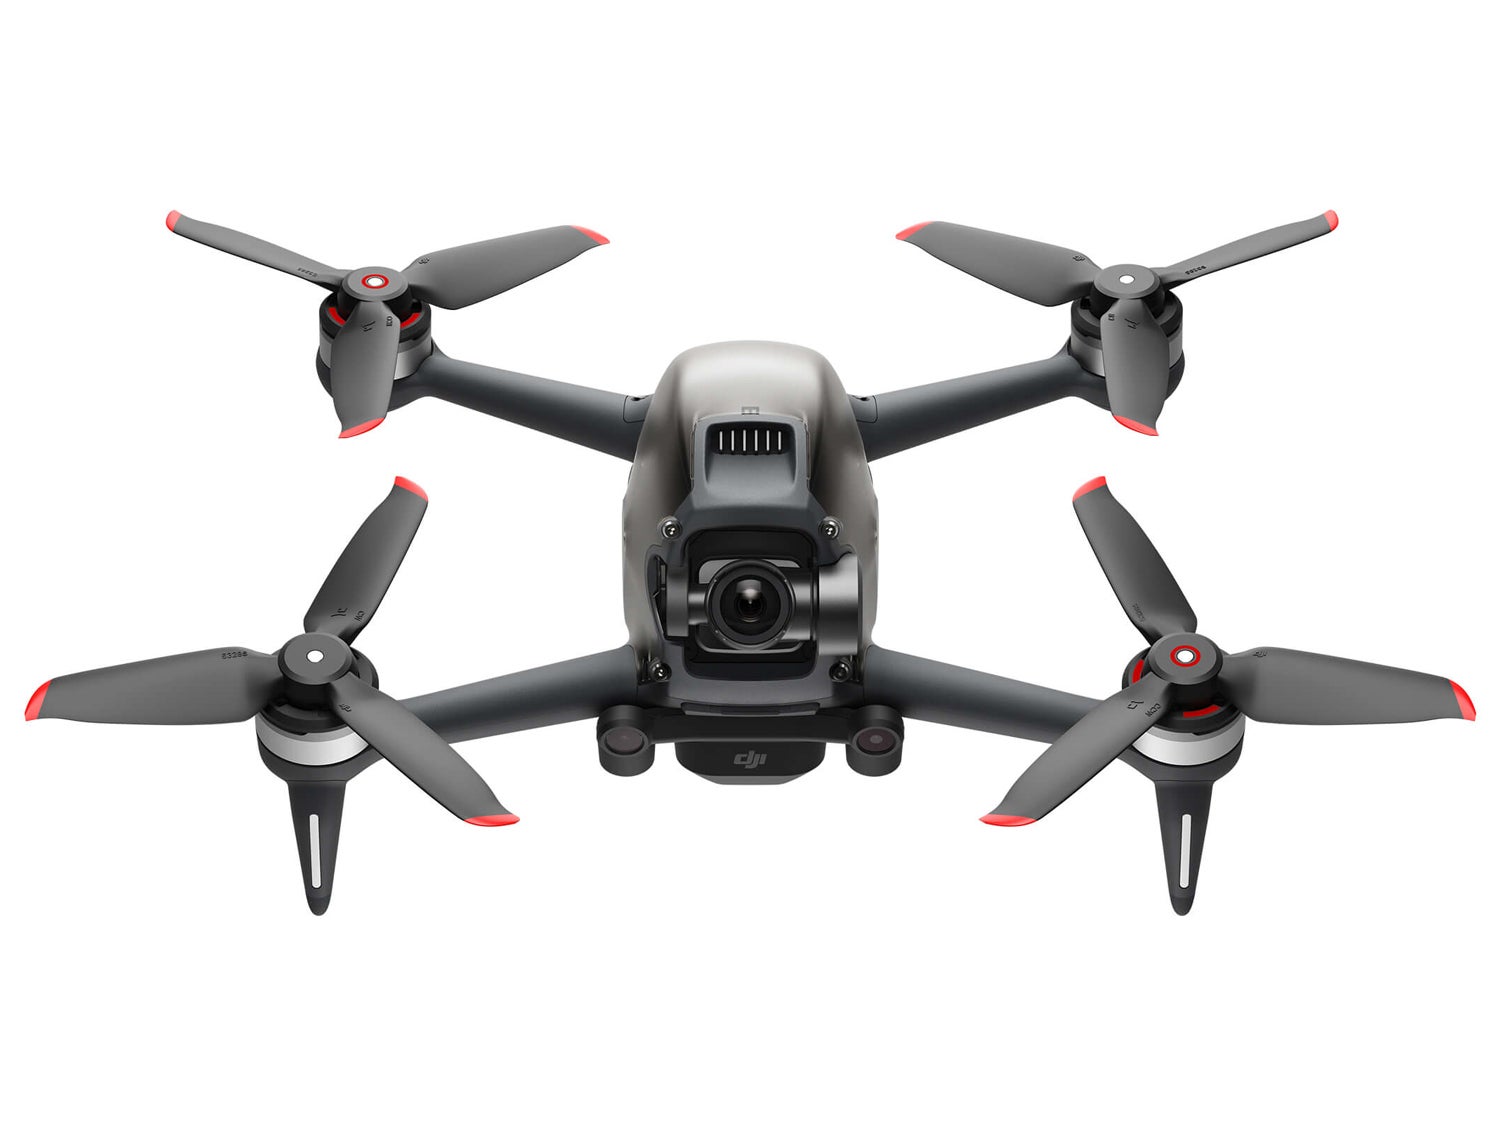 DJI’s new FPV drone allows operators to capture footage from a first